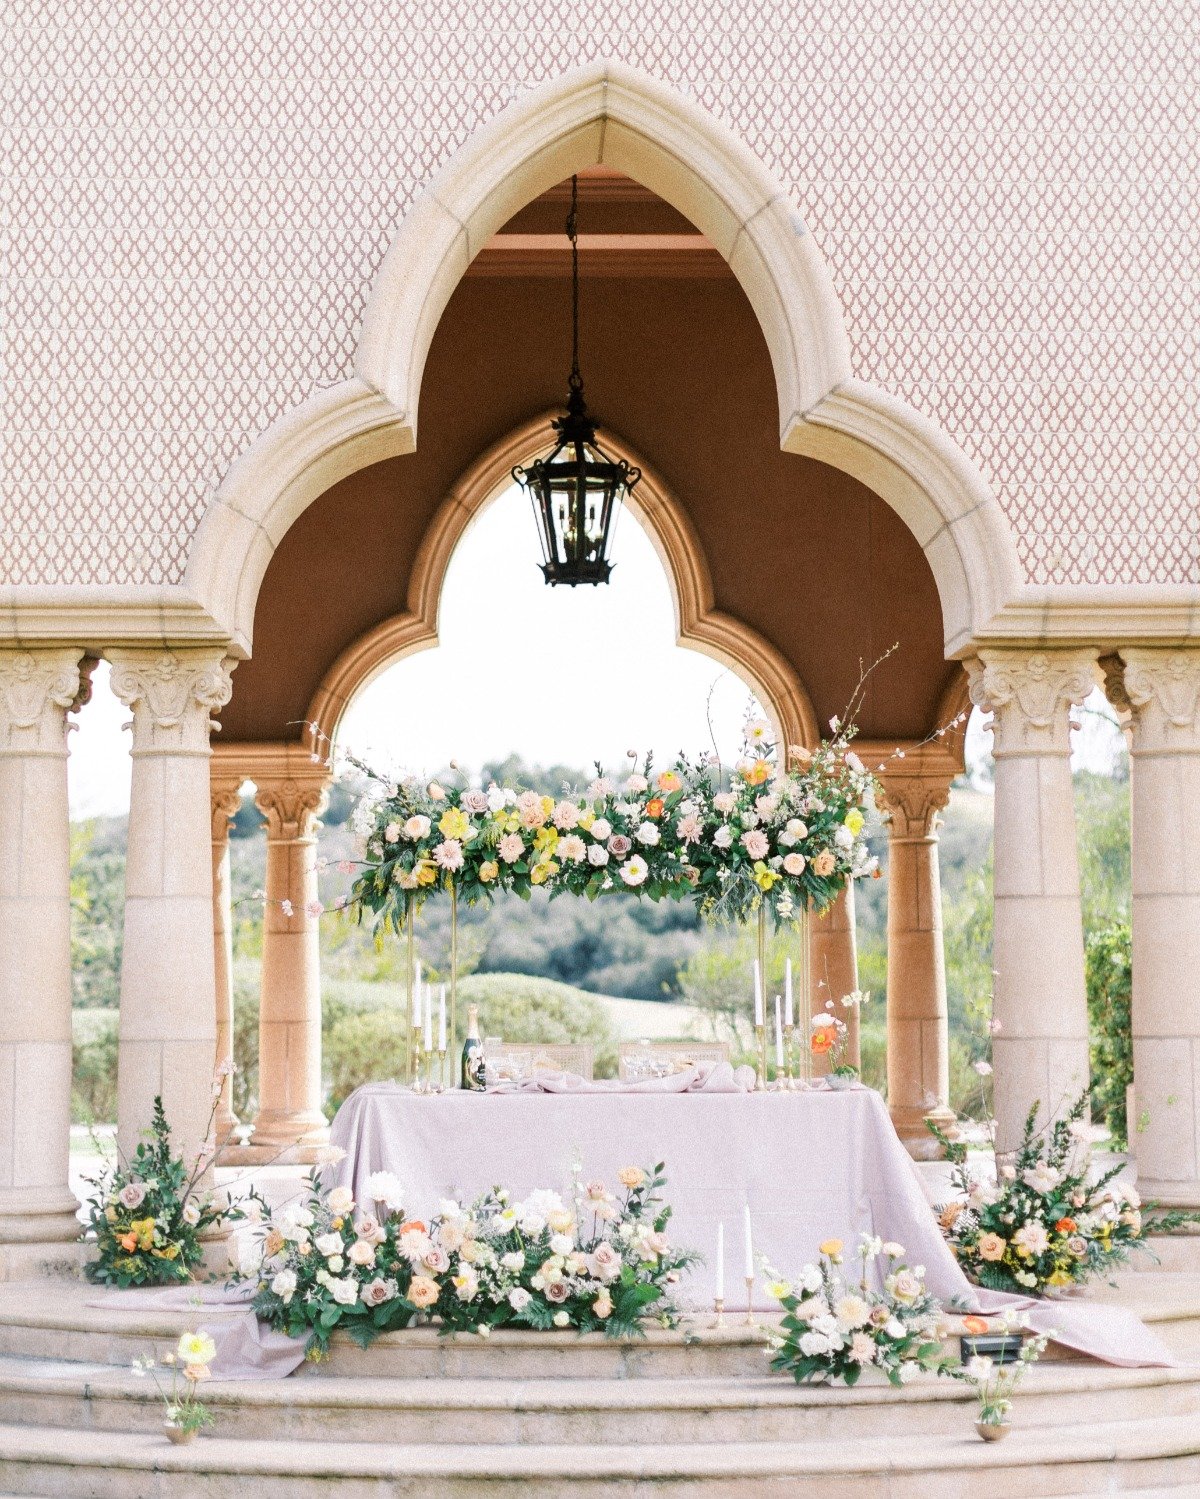 Sweetheart table for reception covered in floral arrangements and tapered candles